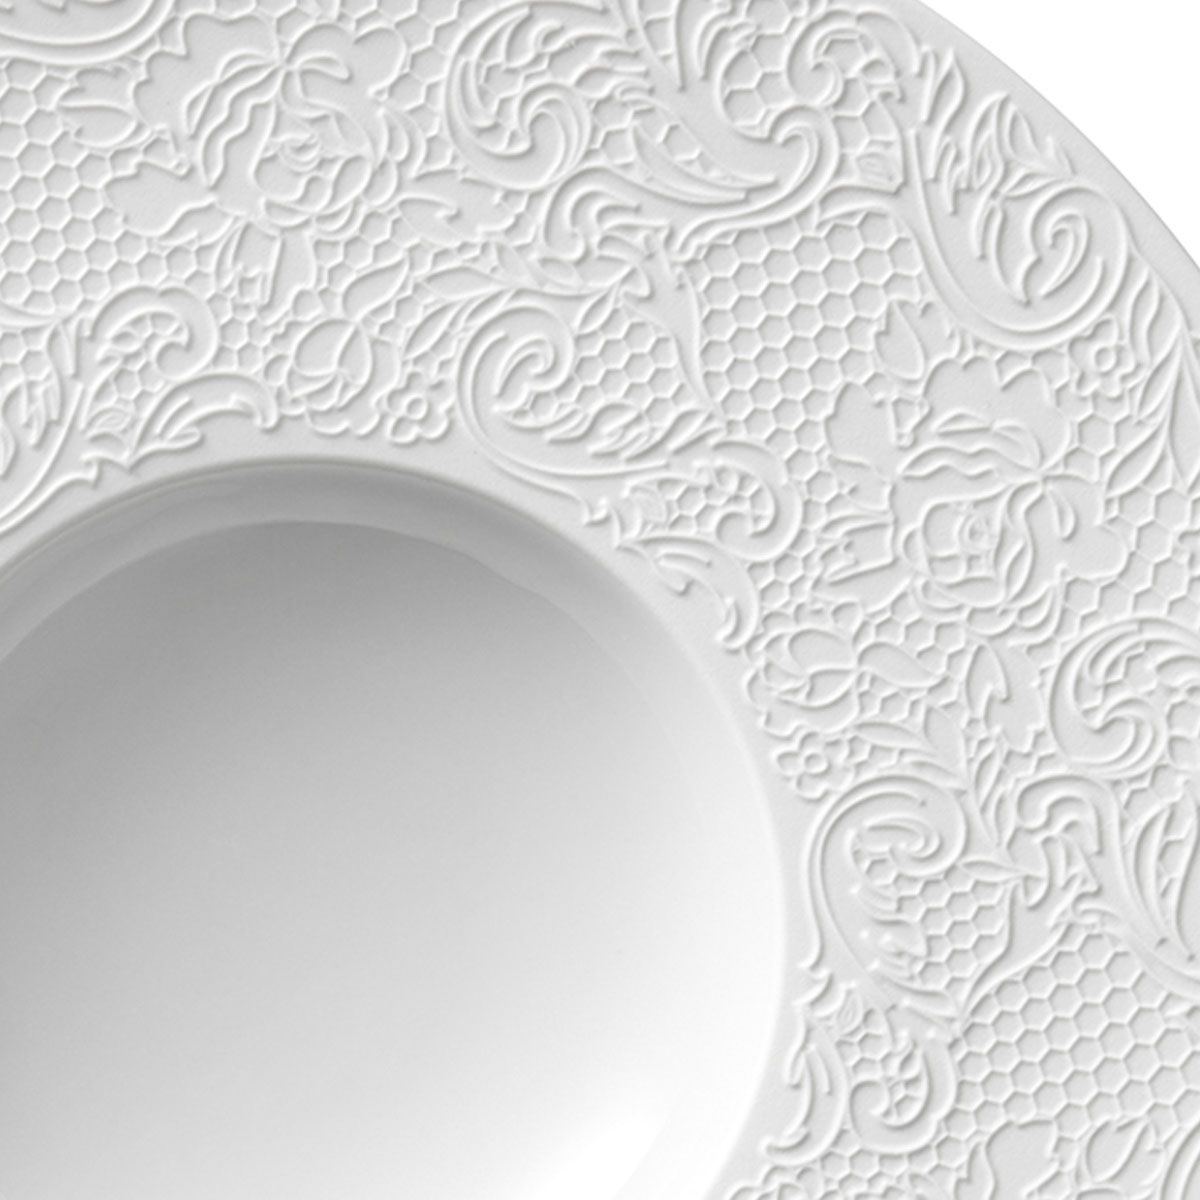 Round gourmet plate 28 cm Degrenne L couture collection